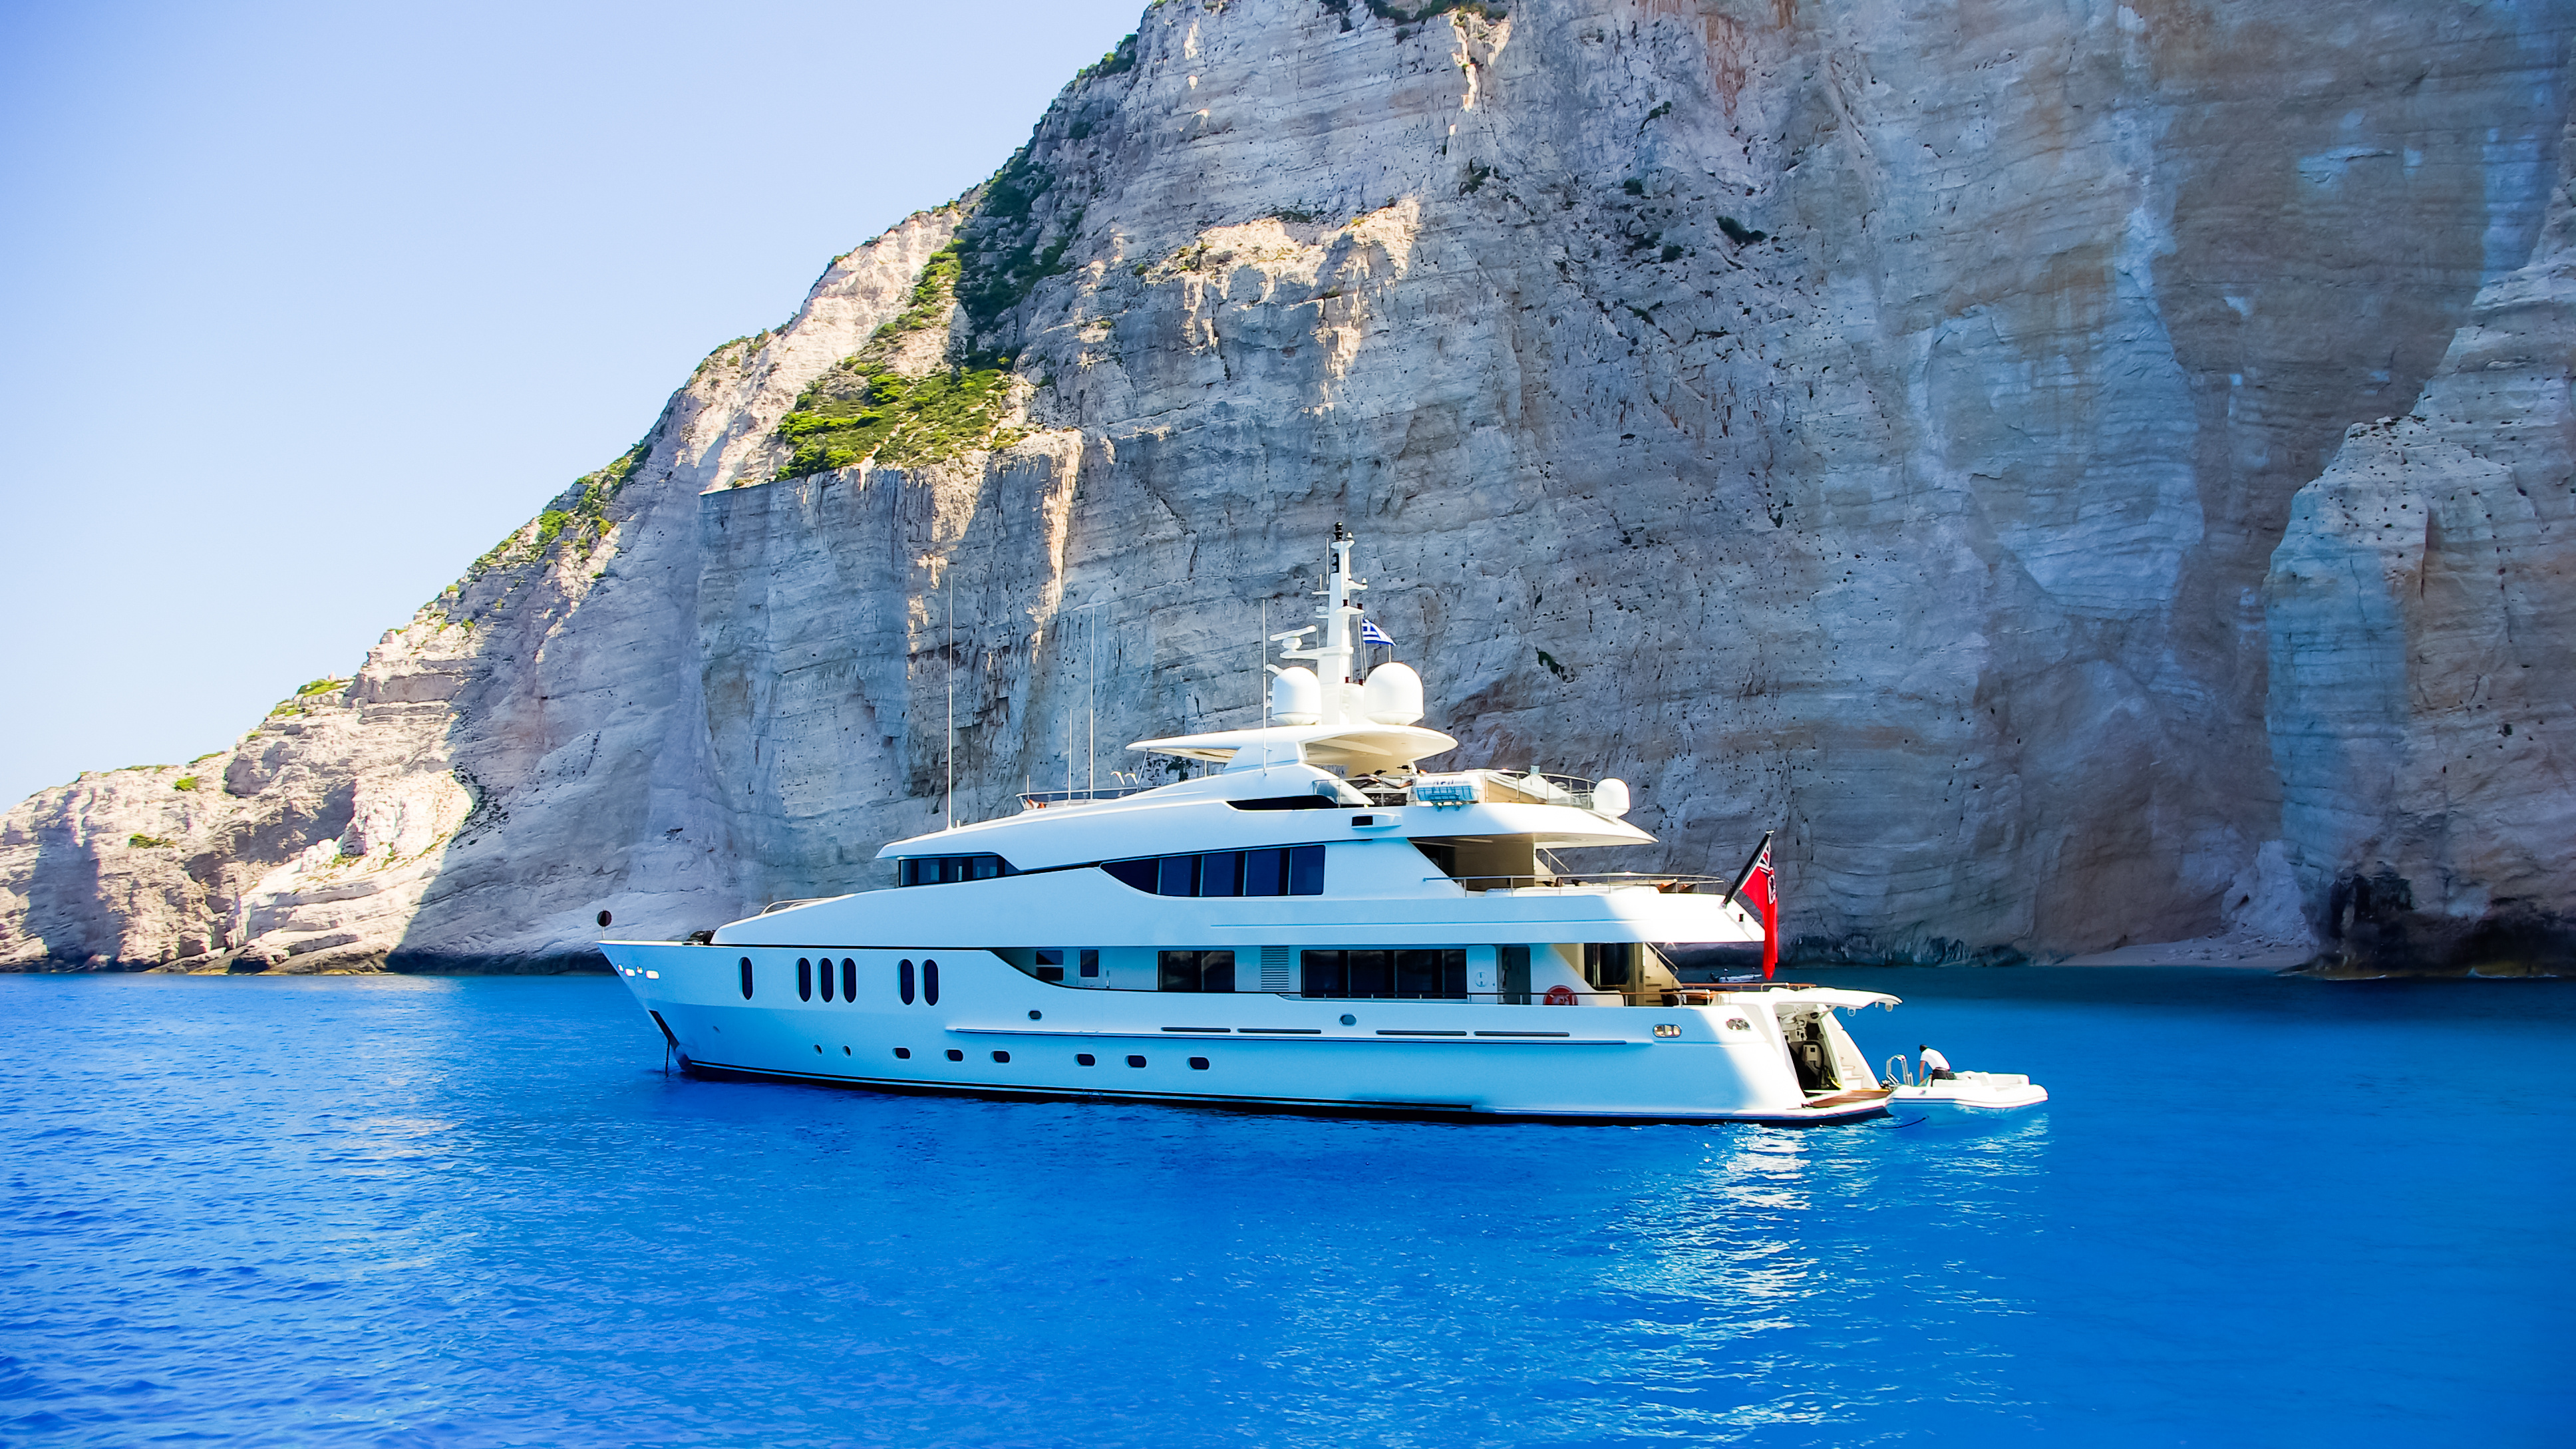 Private yacht at anchor in Zakynthos, Greece